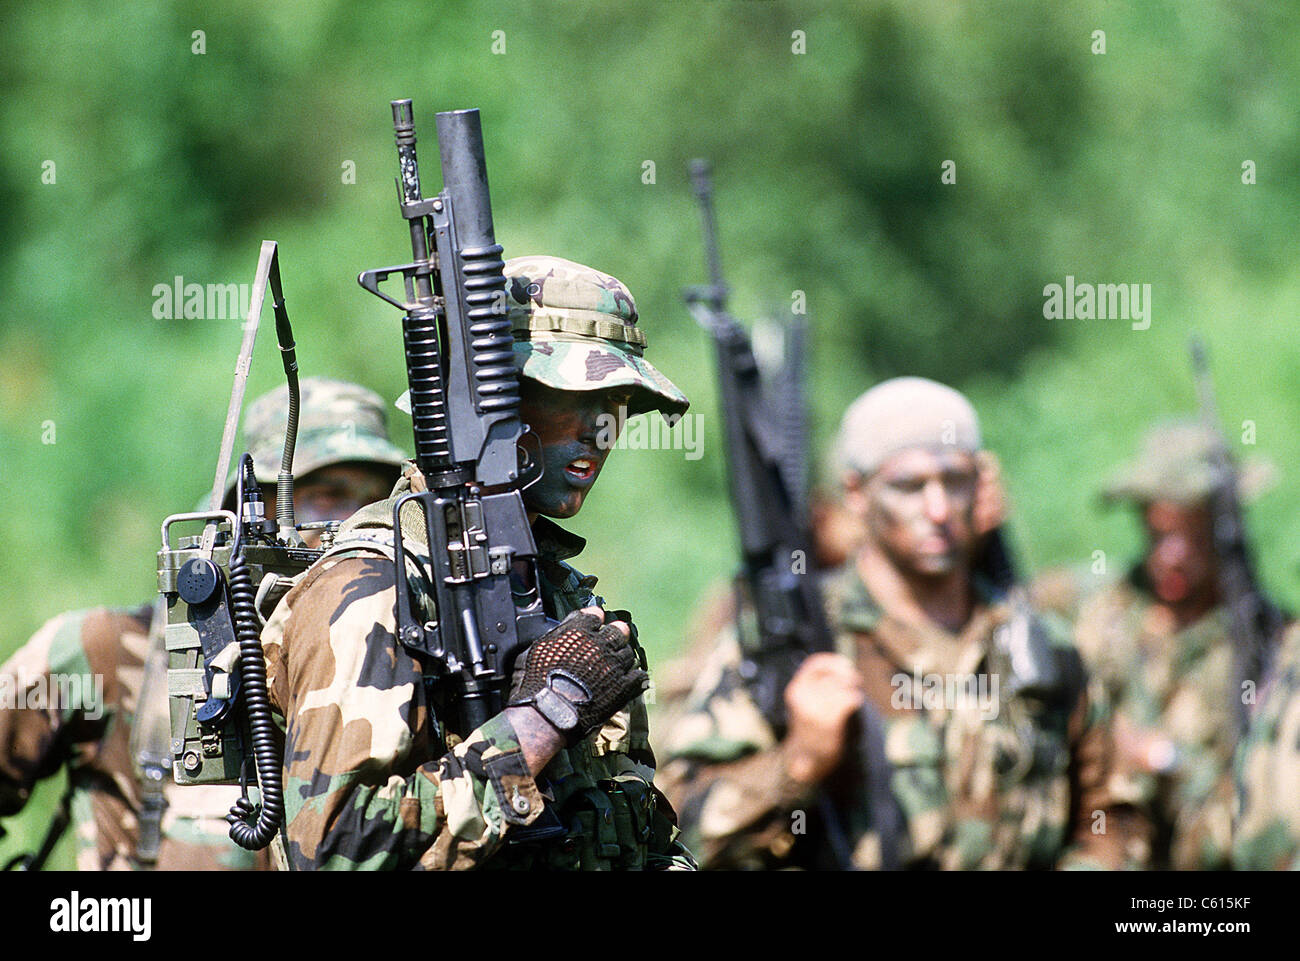 US Navy SEALs in warfare training. Foreground SEAL carries a field radio and a Colt Commando assault rifle equipped with an M-203 grenade launcher. Aug. 1 1987. (BSLOC 2011 12 274) Stock Photo